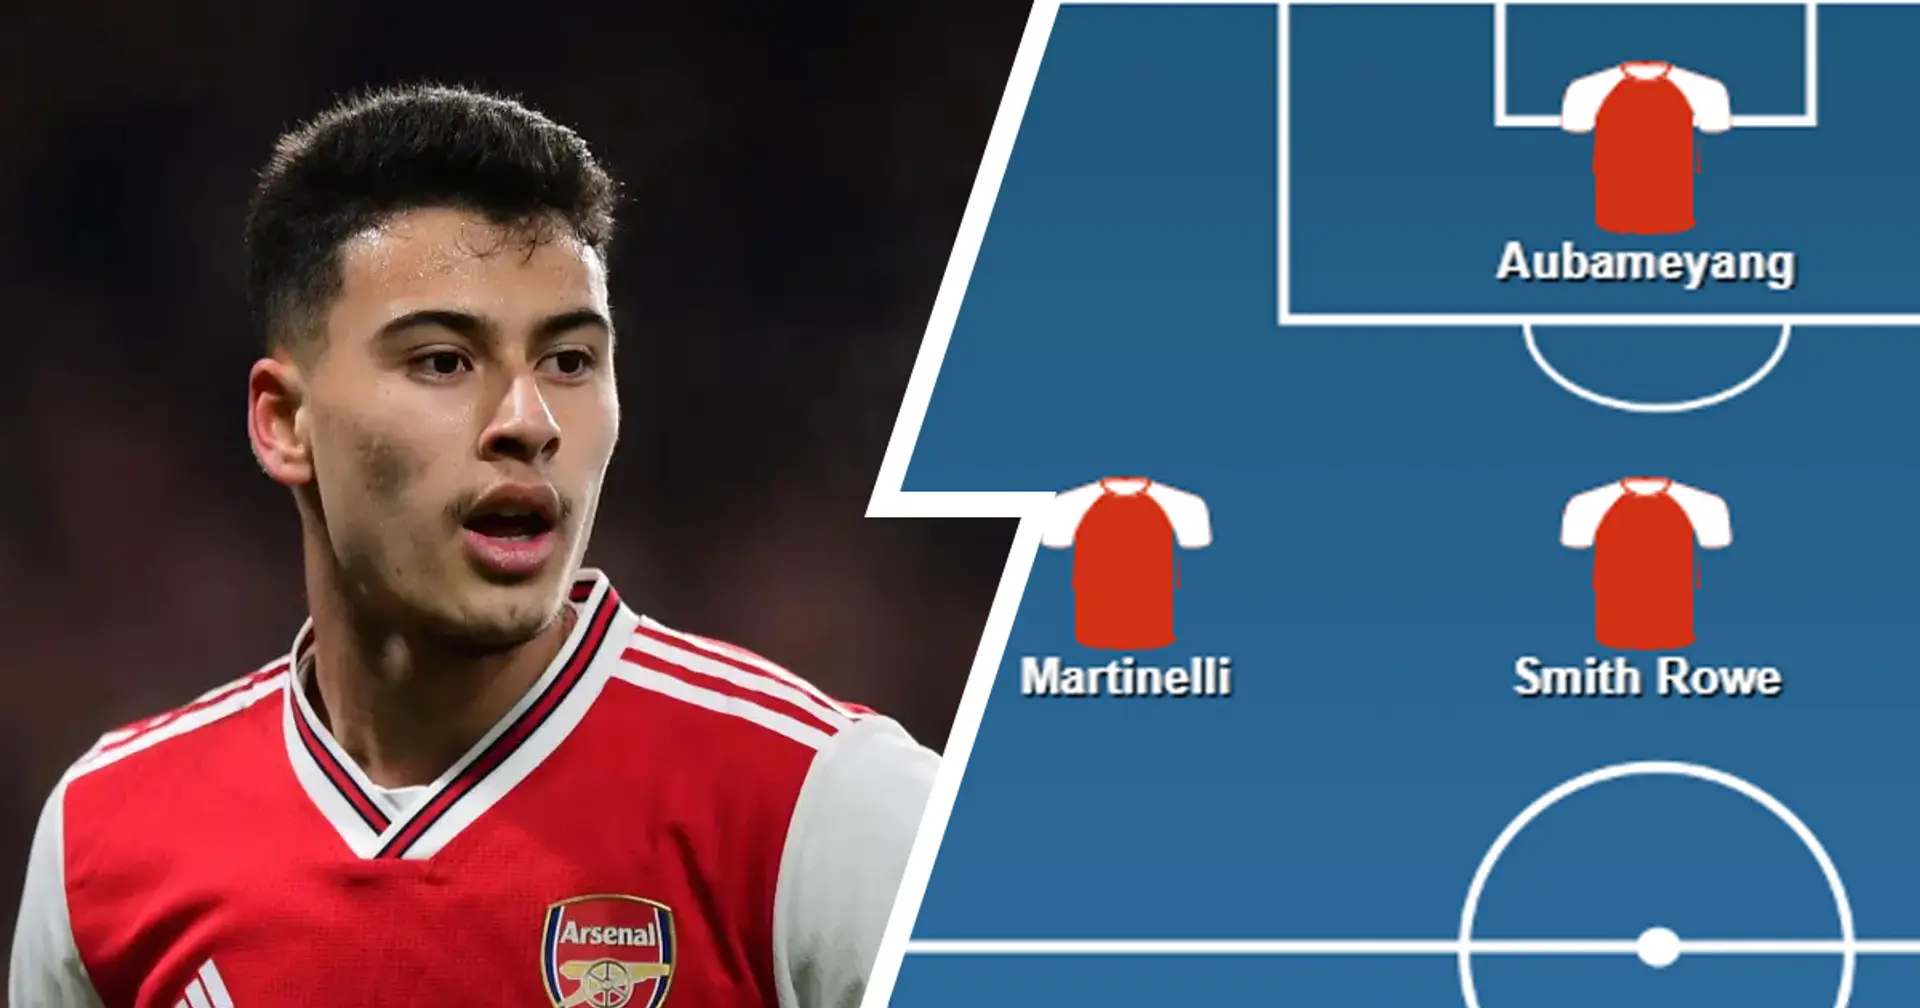 'Martinelli would mount pressure on their defence': Arsenal fans pick ultimate XI vs Leicester